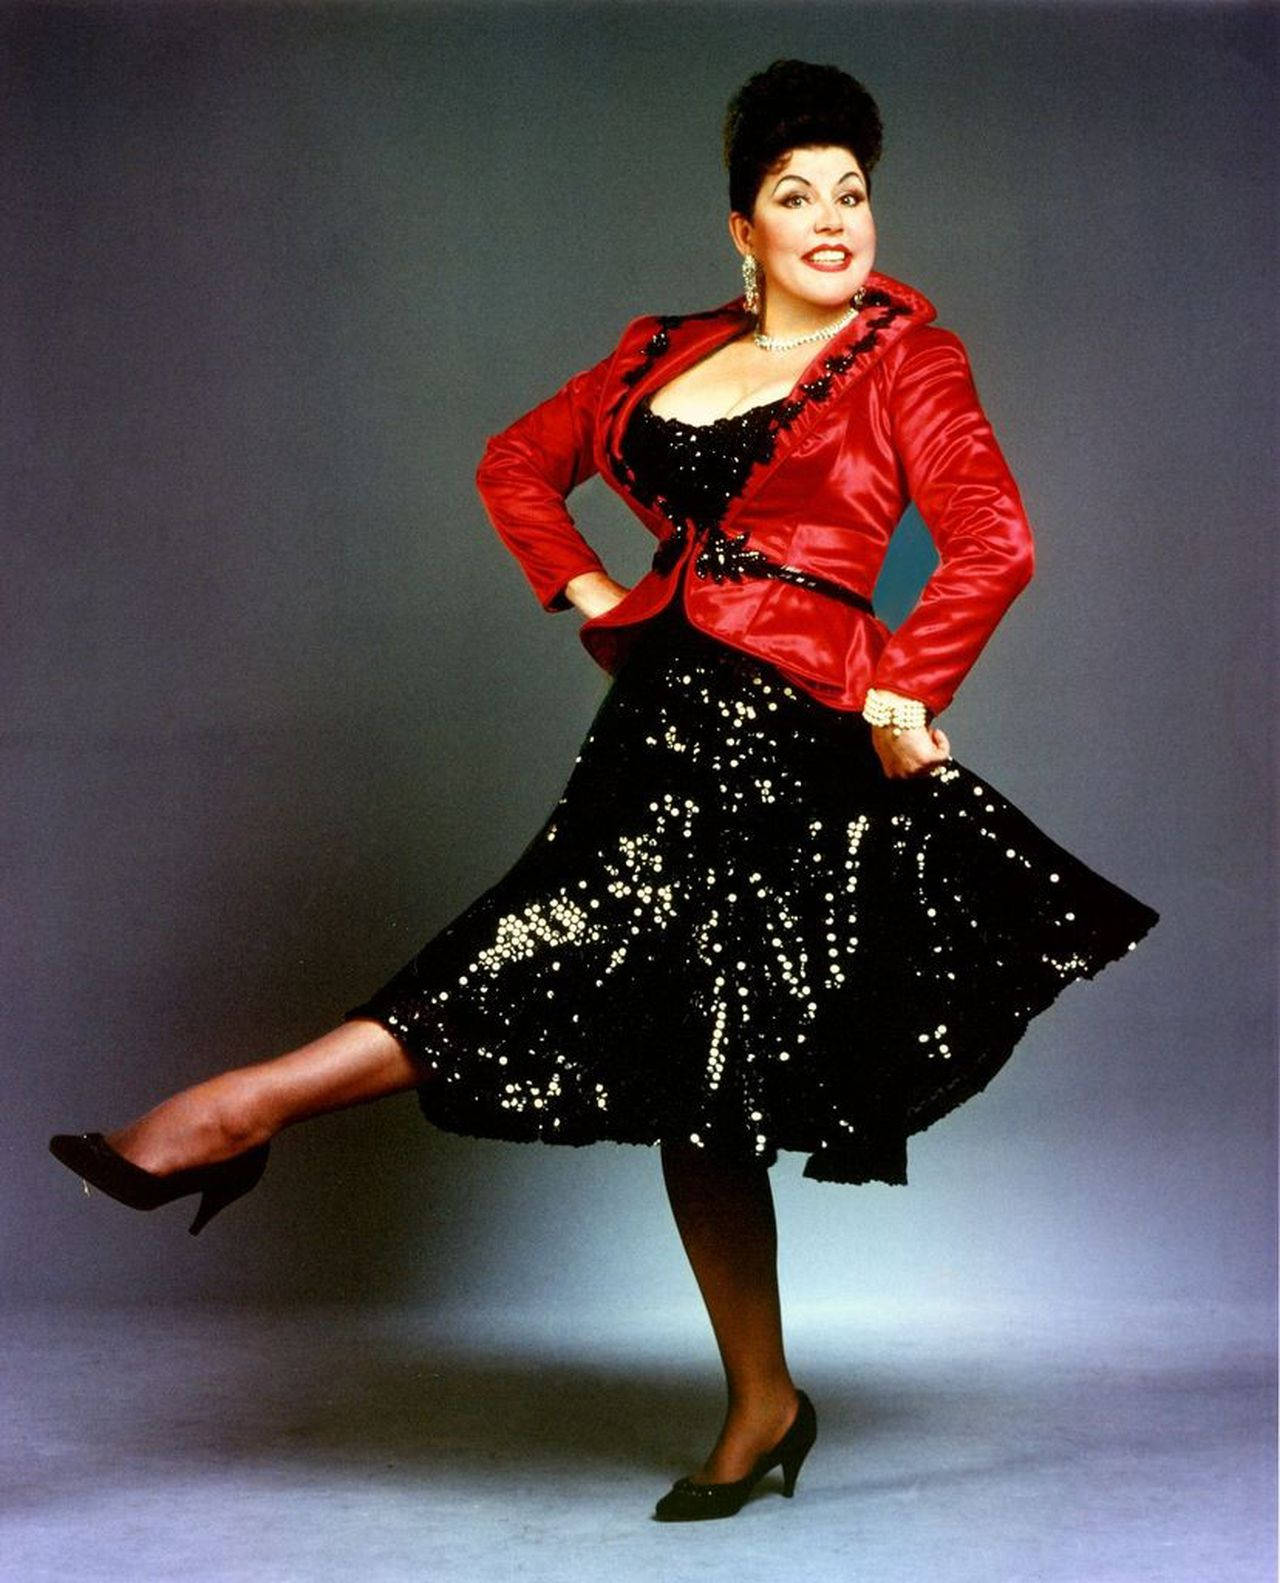 Ethel Merman Dancing In A Black And Red Outfit Wallpaper